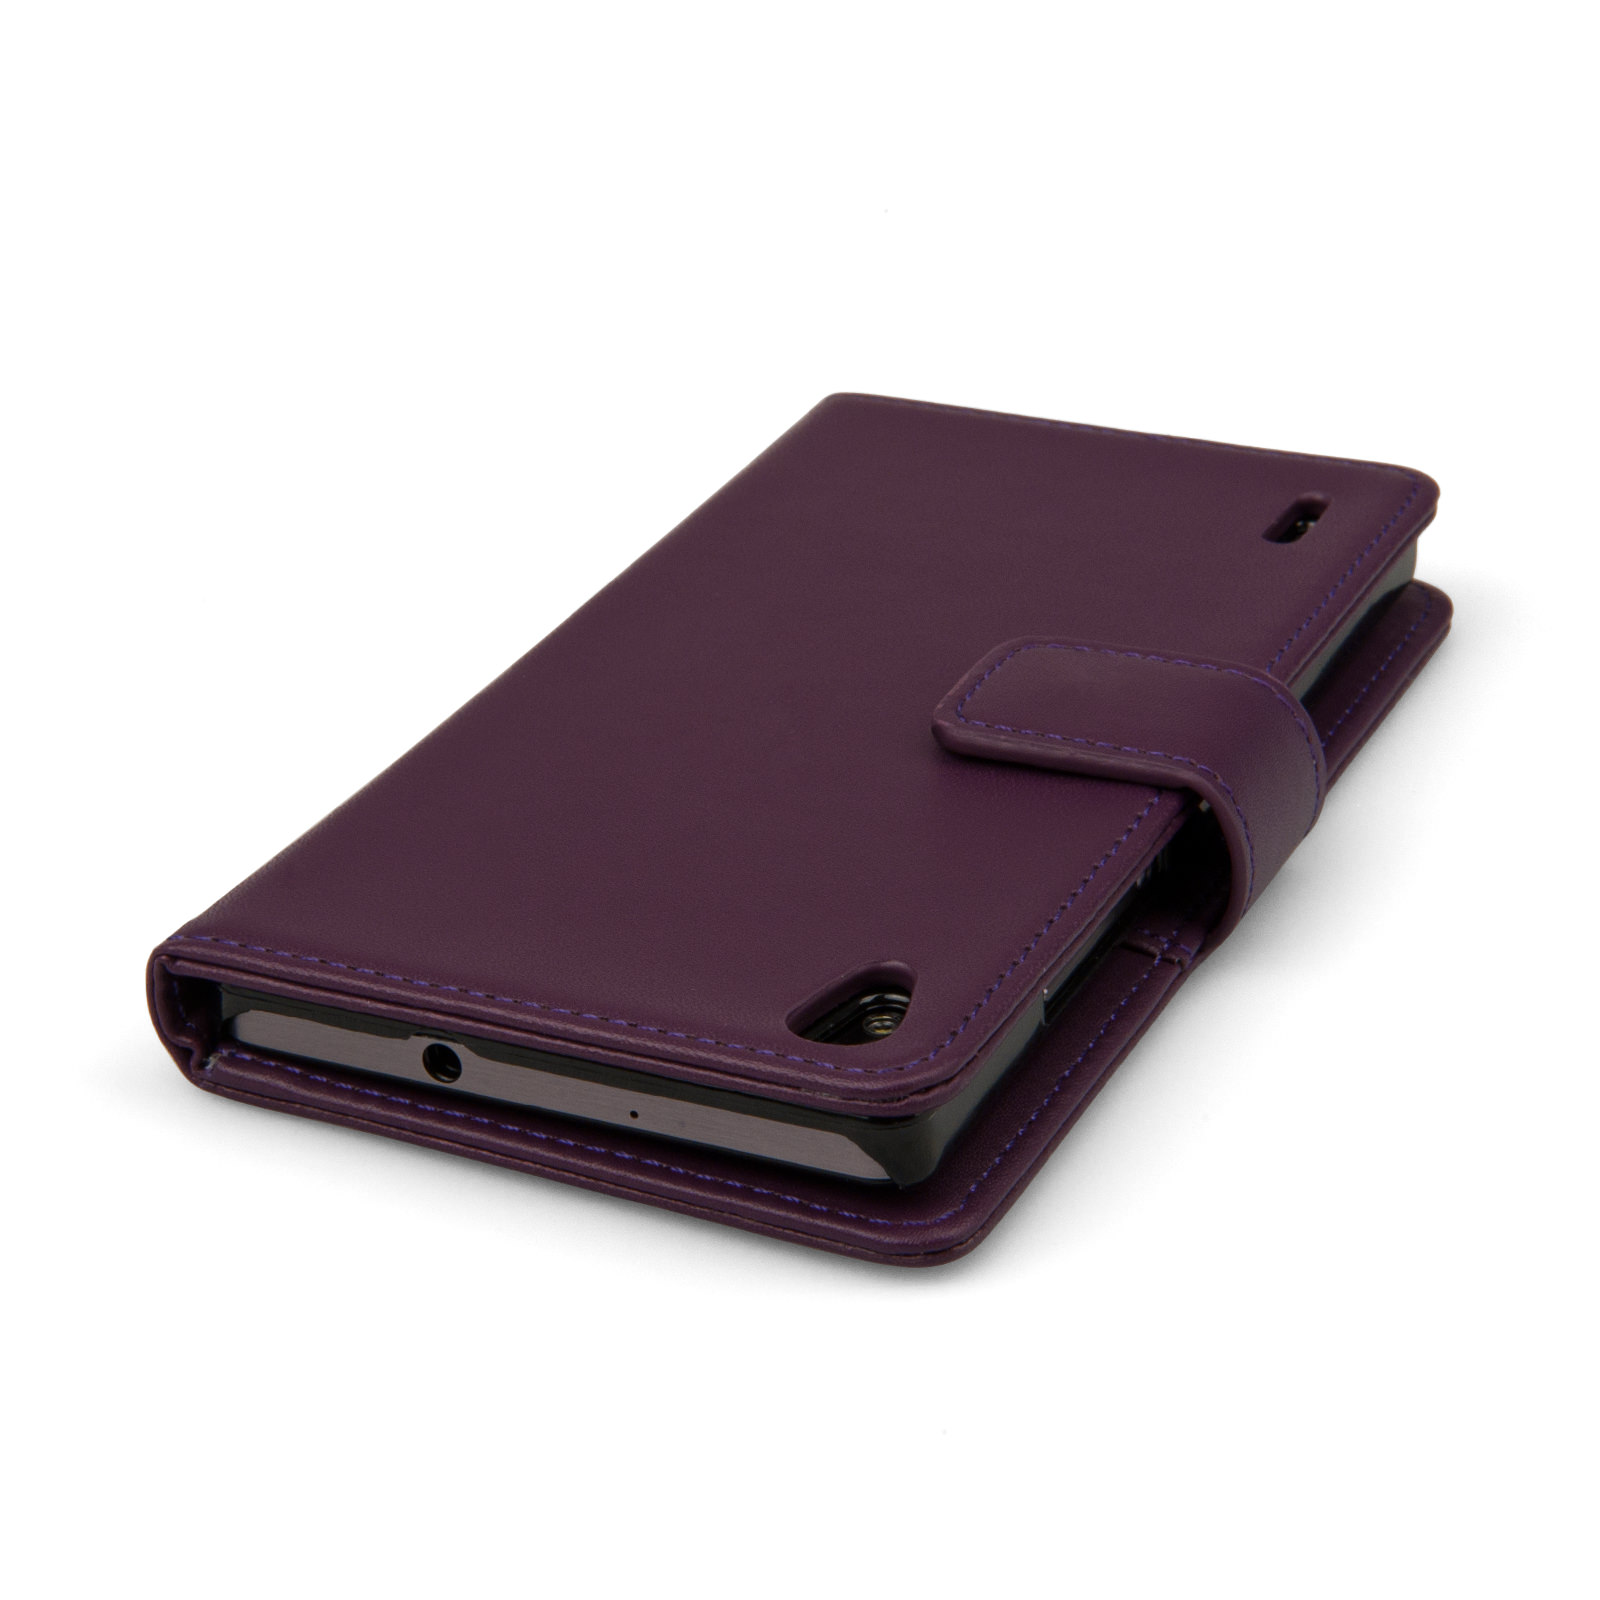 YouSave Huawei Ascend P7 Leather-Effect Wallet Case - Purple